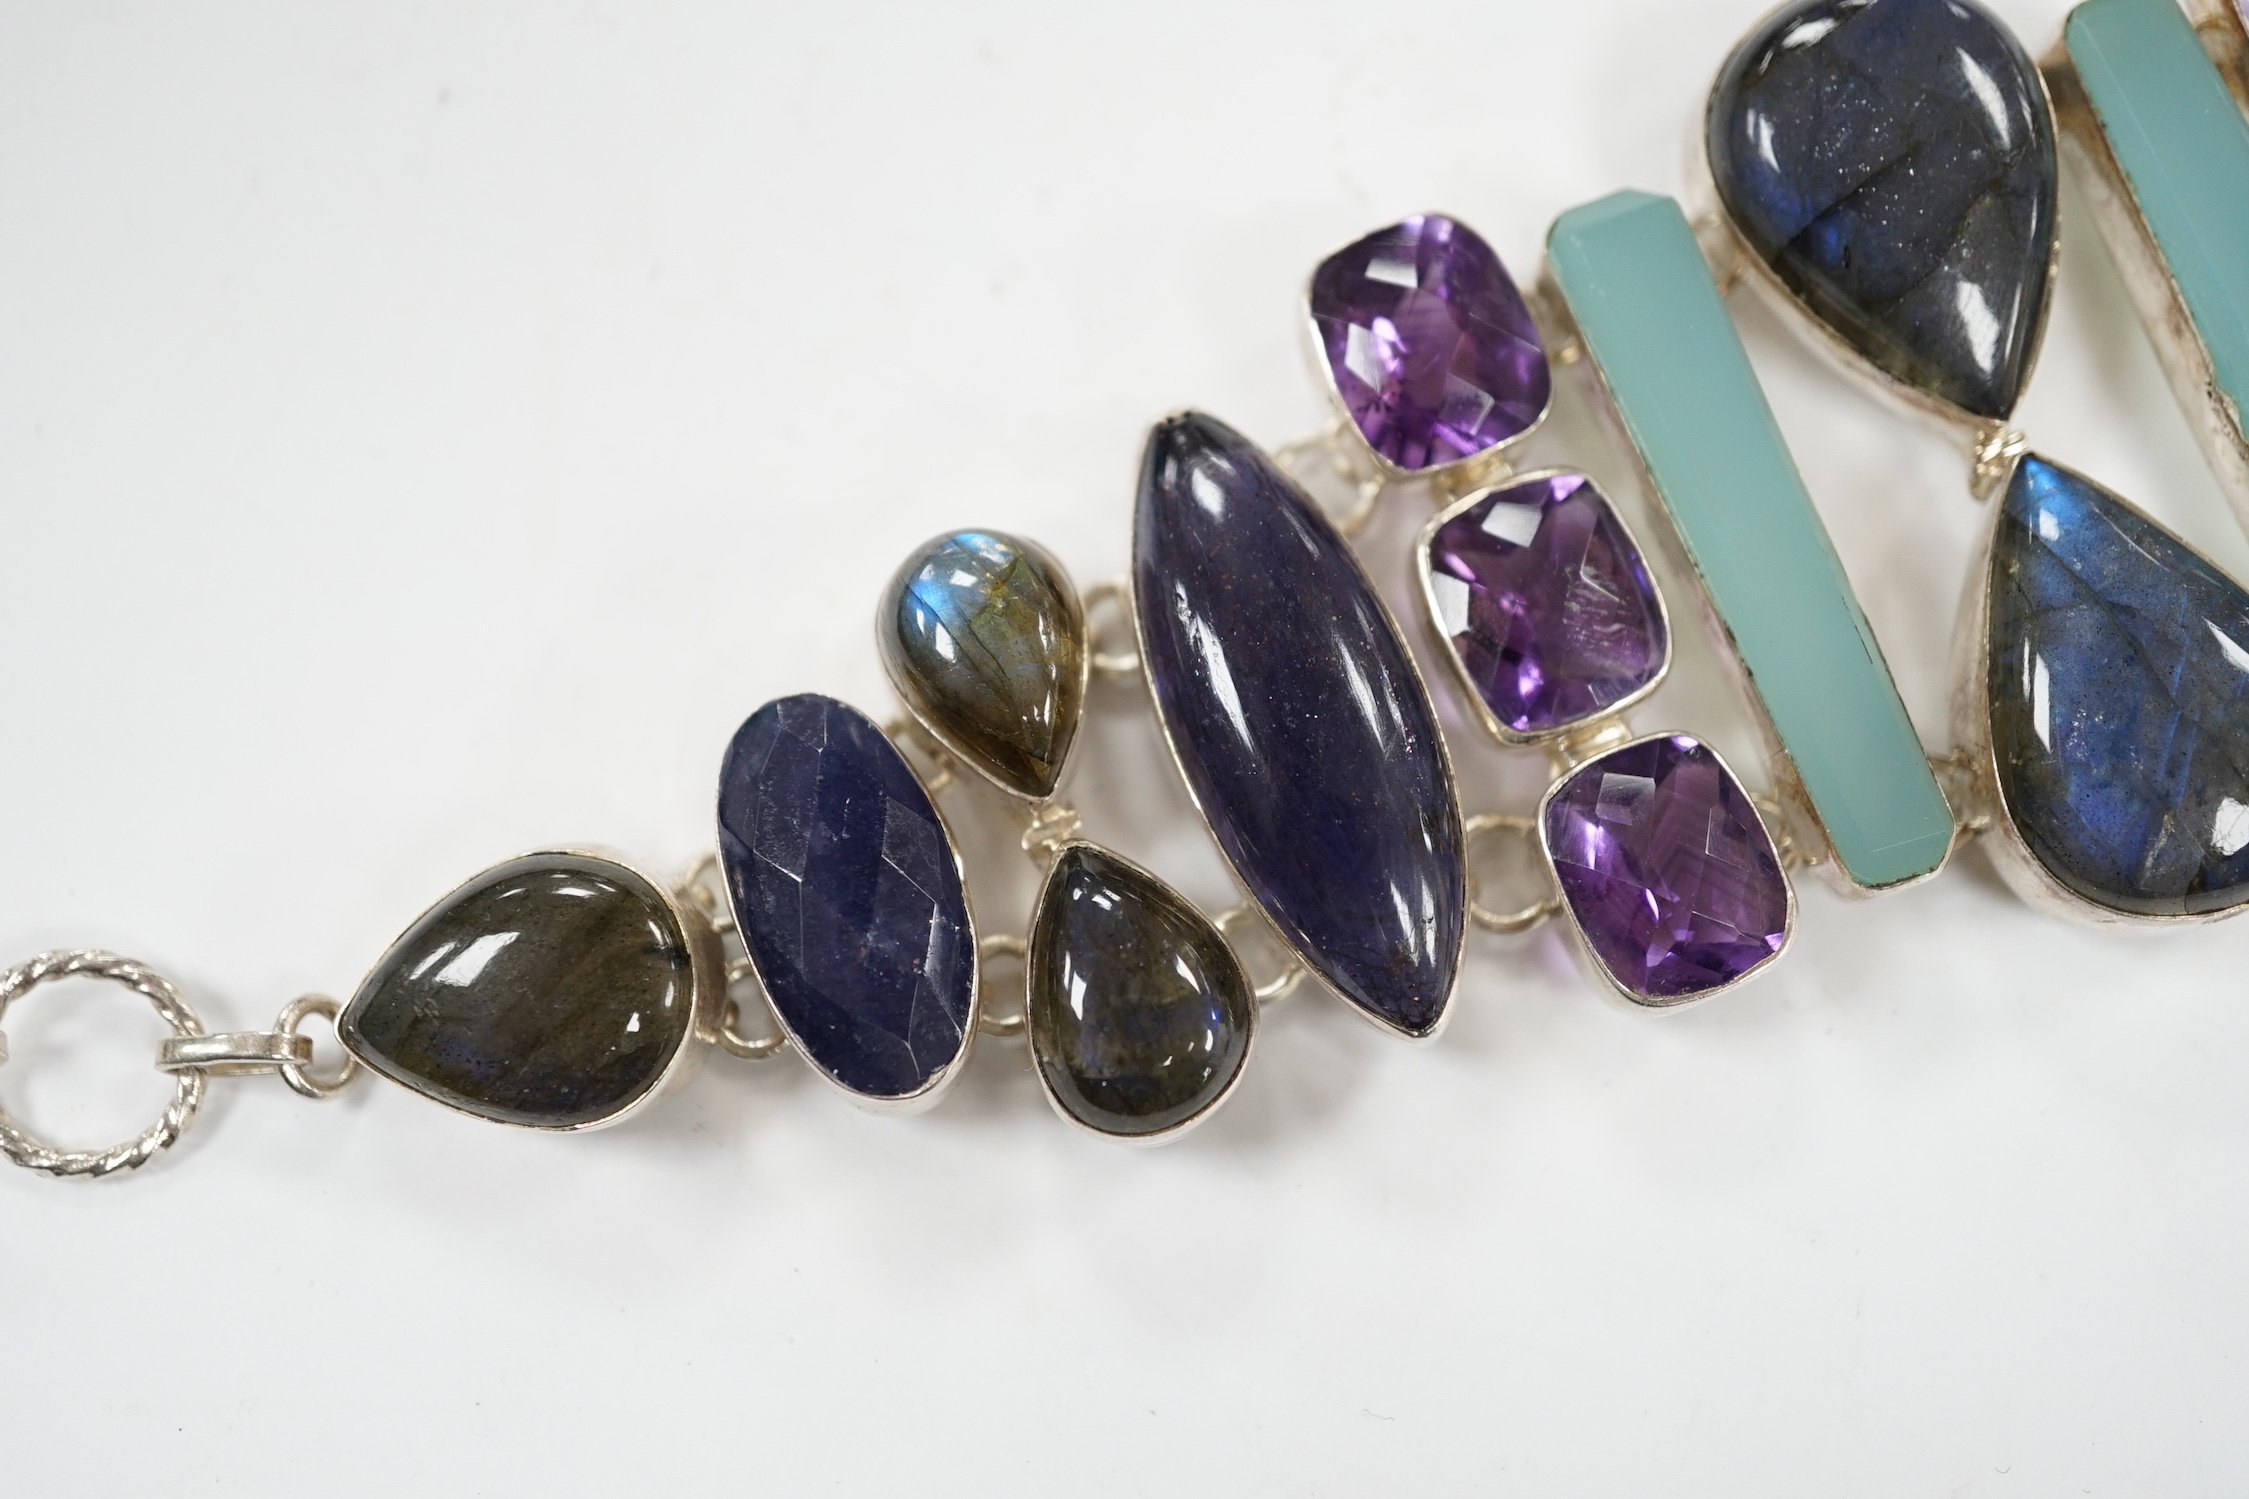 A white metal and multi gem set bracelet, including dyed agate, amethyst and labradorite, 21cm.